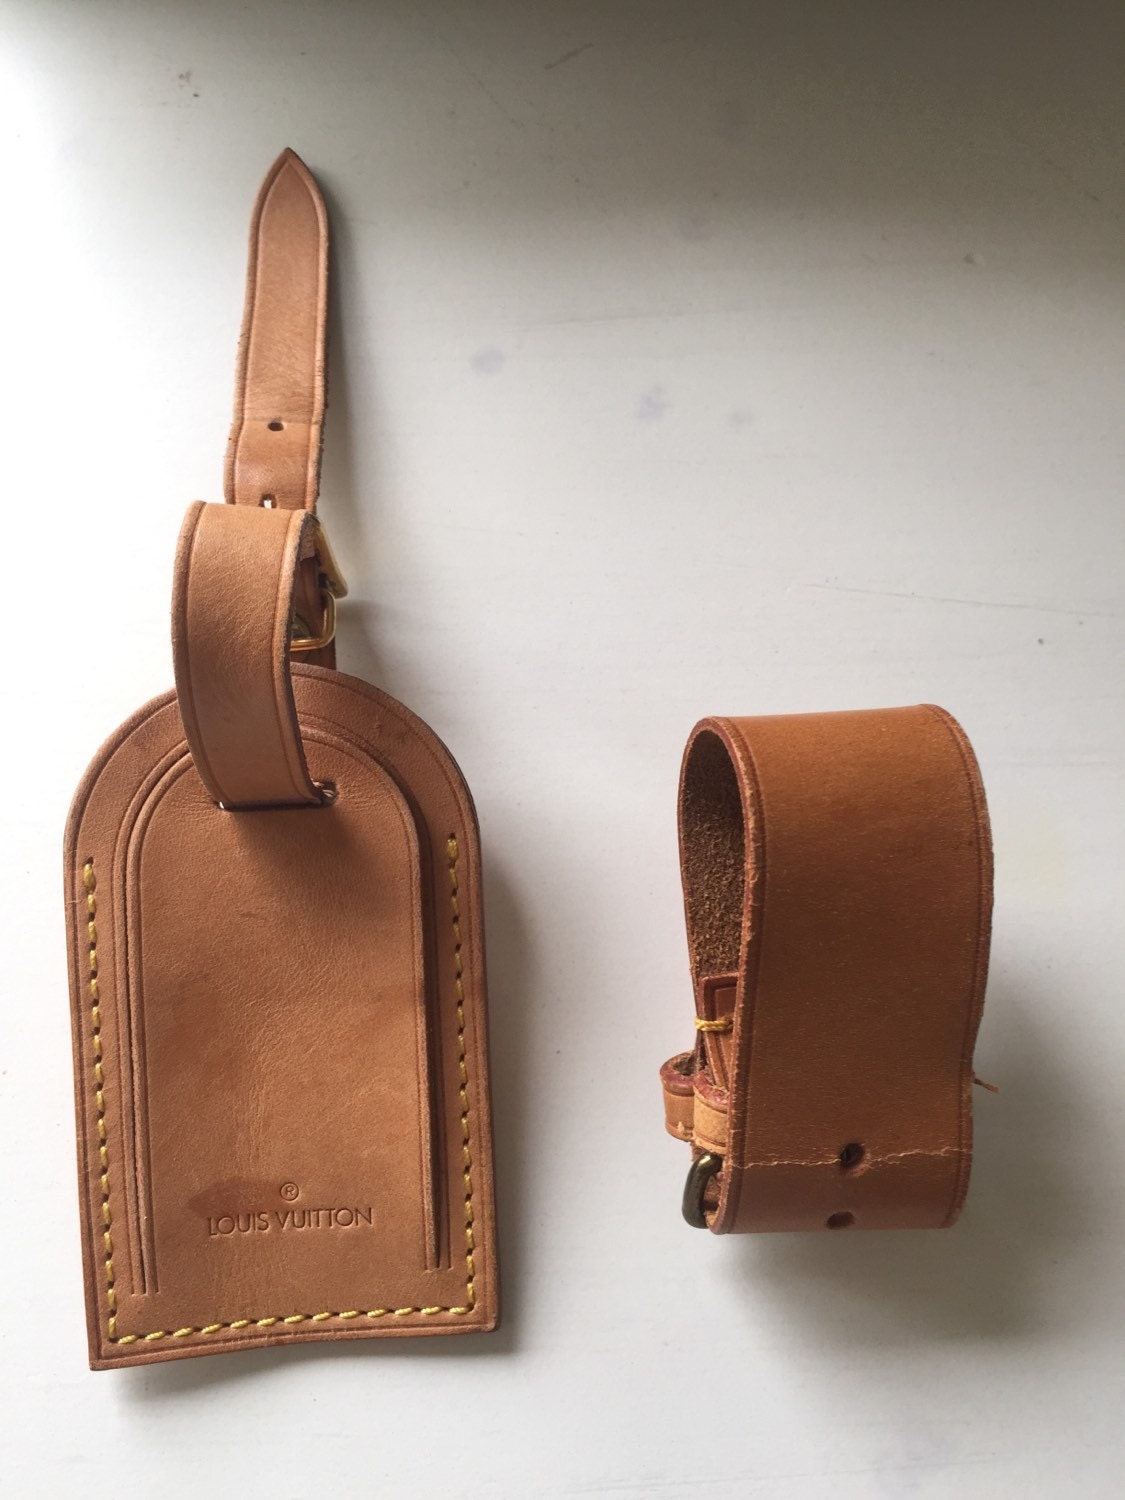 Louis Vuitton vachetta leather luggage ID tag by PinkerlyBoutique